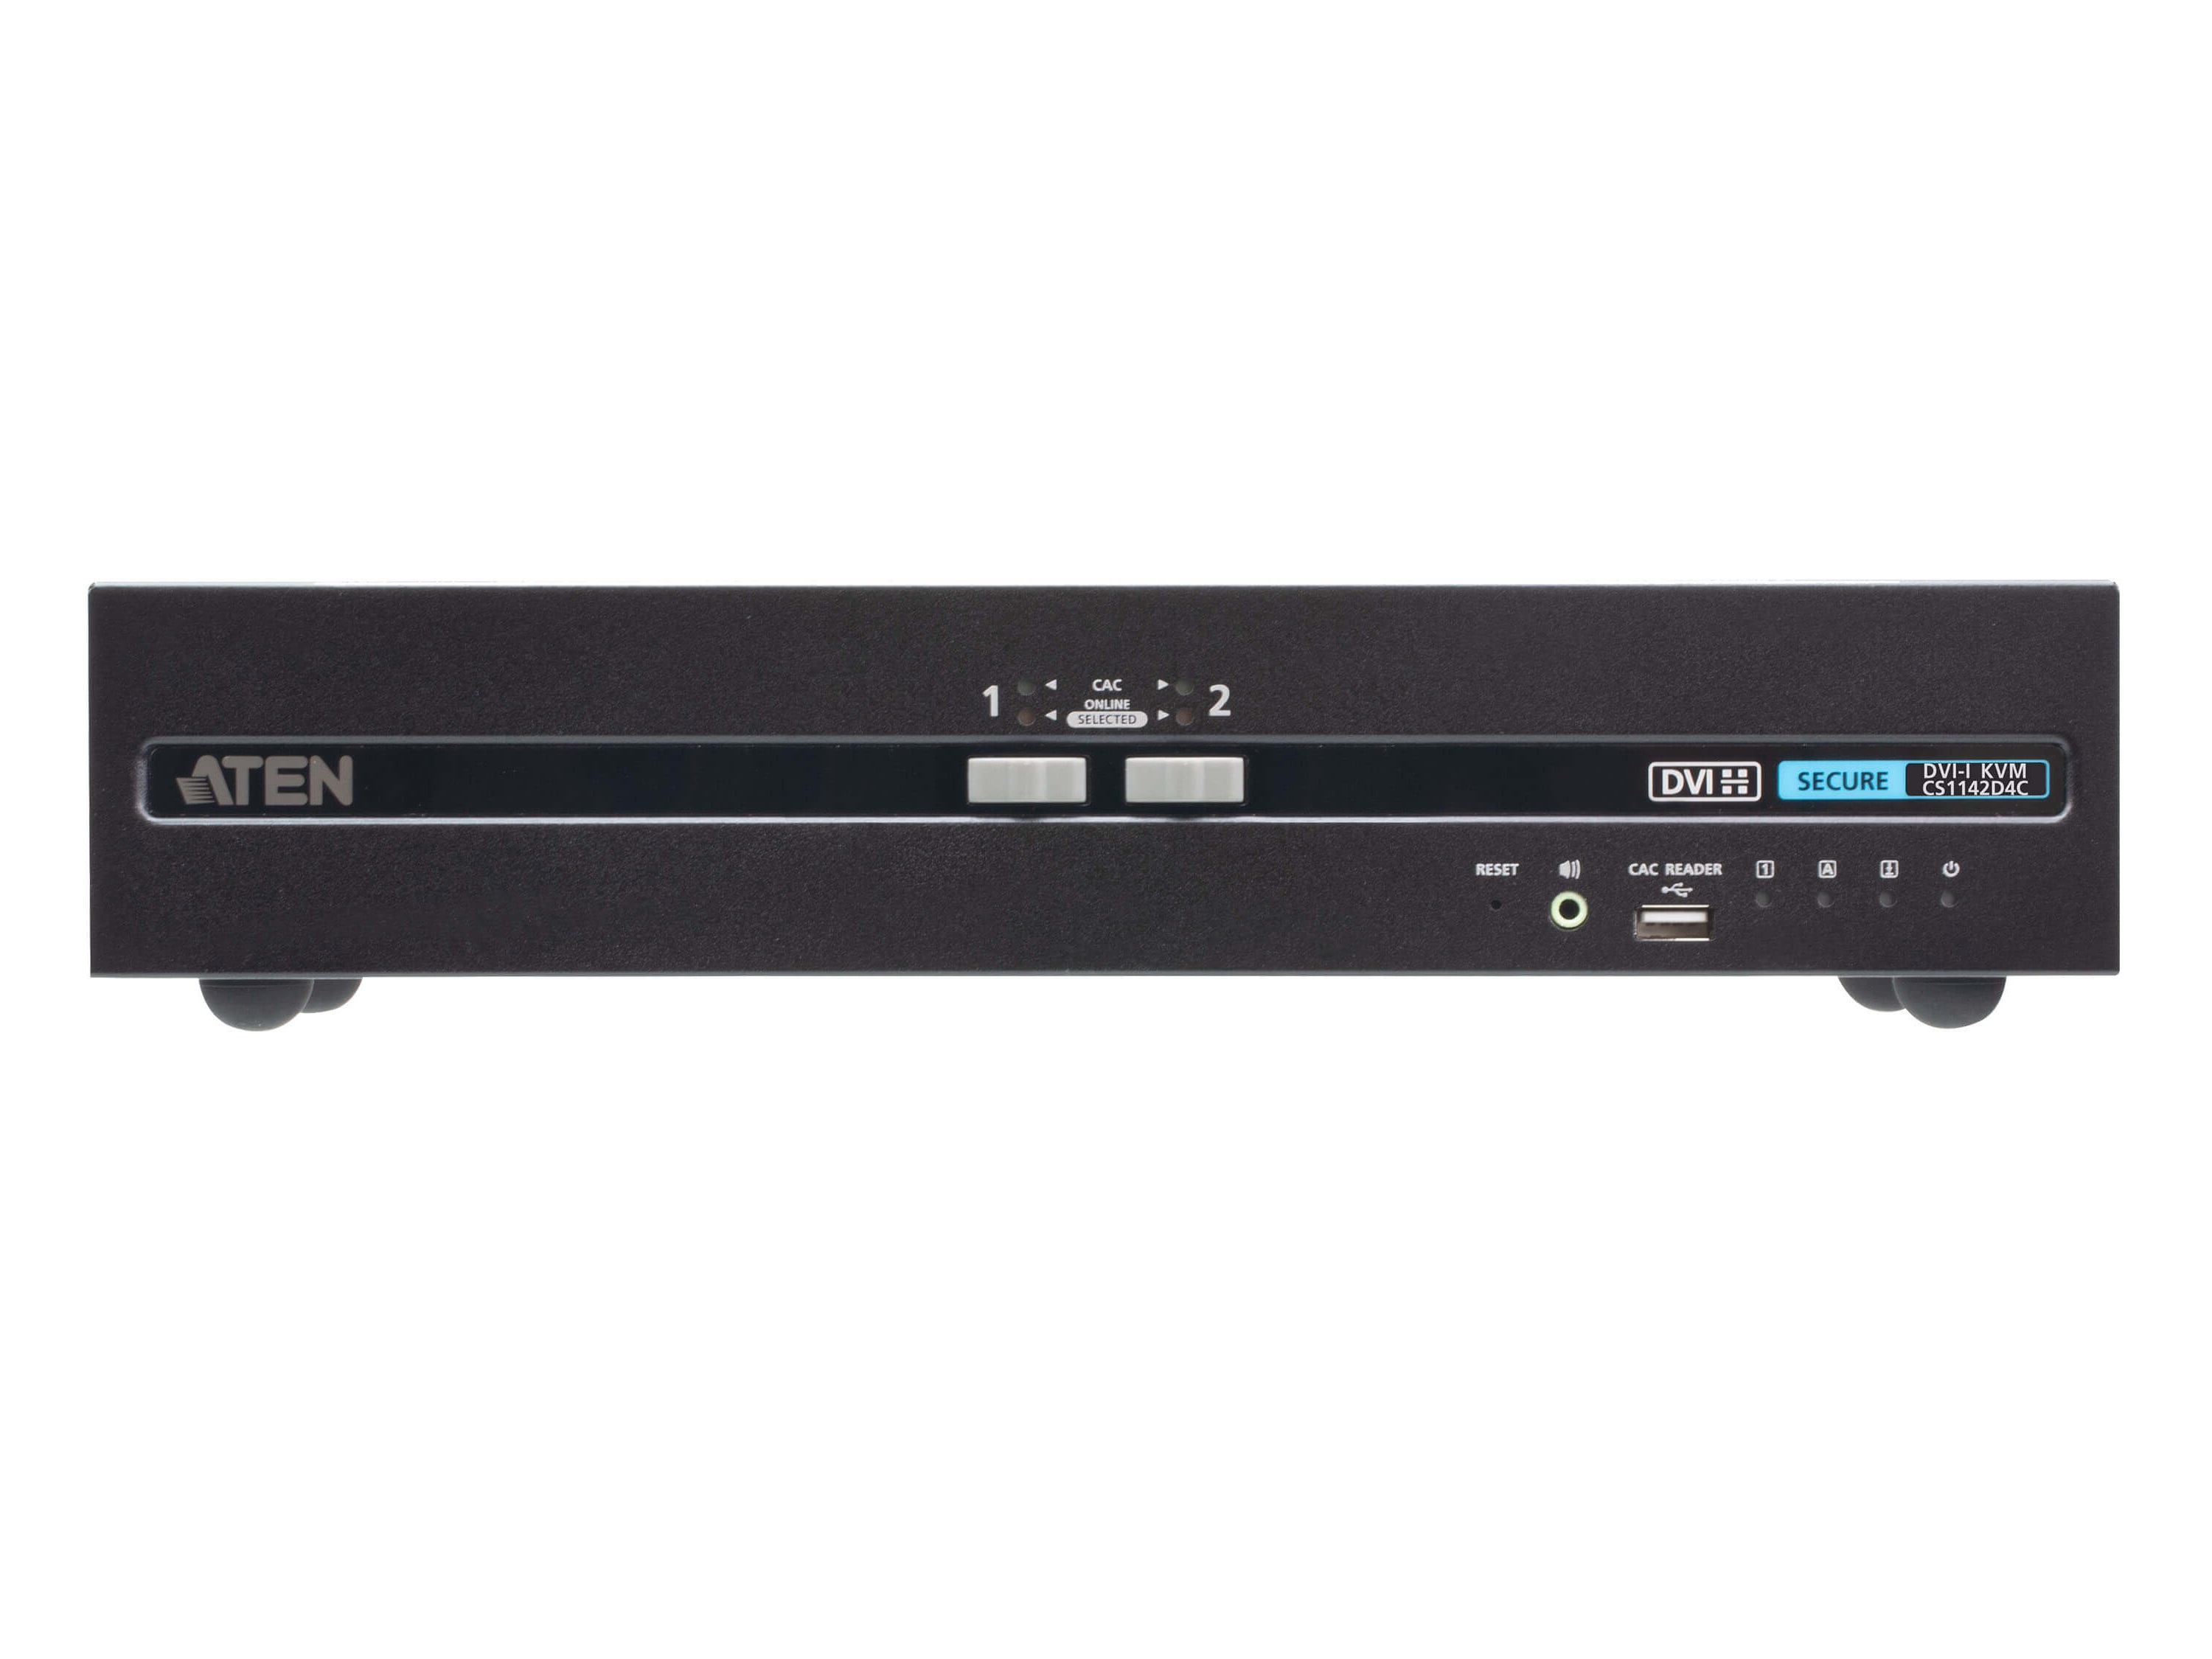 CS1142D4C 2-Port USB DVI Dual Display Secure KVM Switch with CAC (PSD PP v4.0 Compliant) by Aten